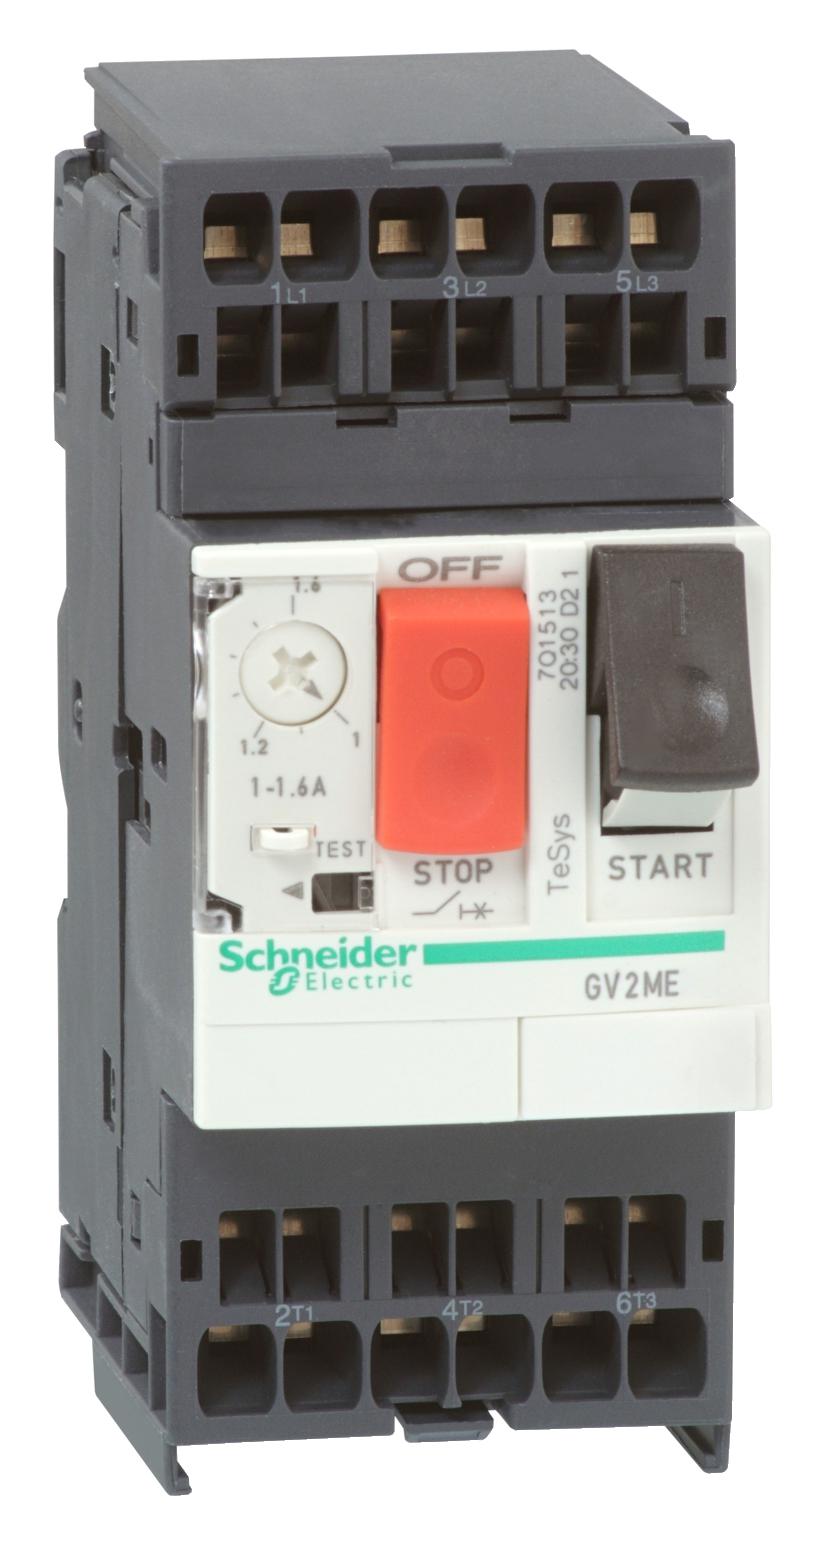 GV2ME063 THERMAL MAGNETIC CIRCUIT BREAKER SCHNEIDER ELECTRIC